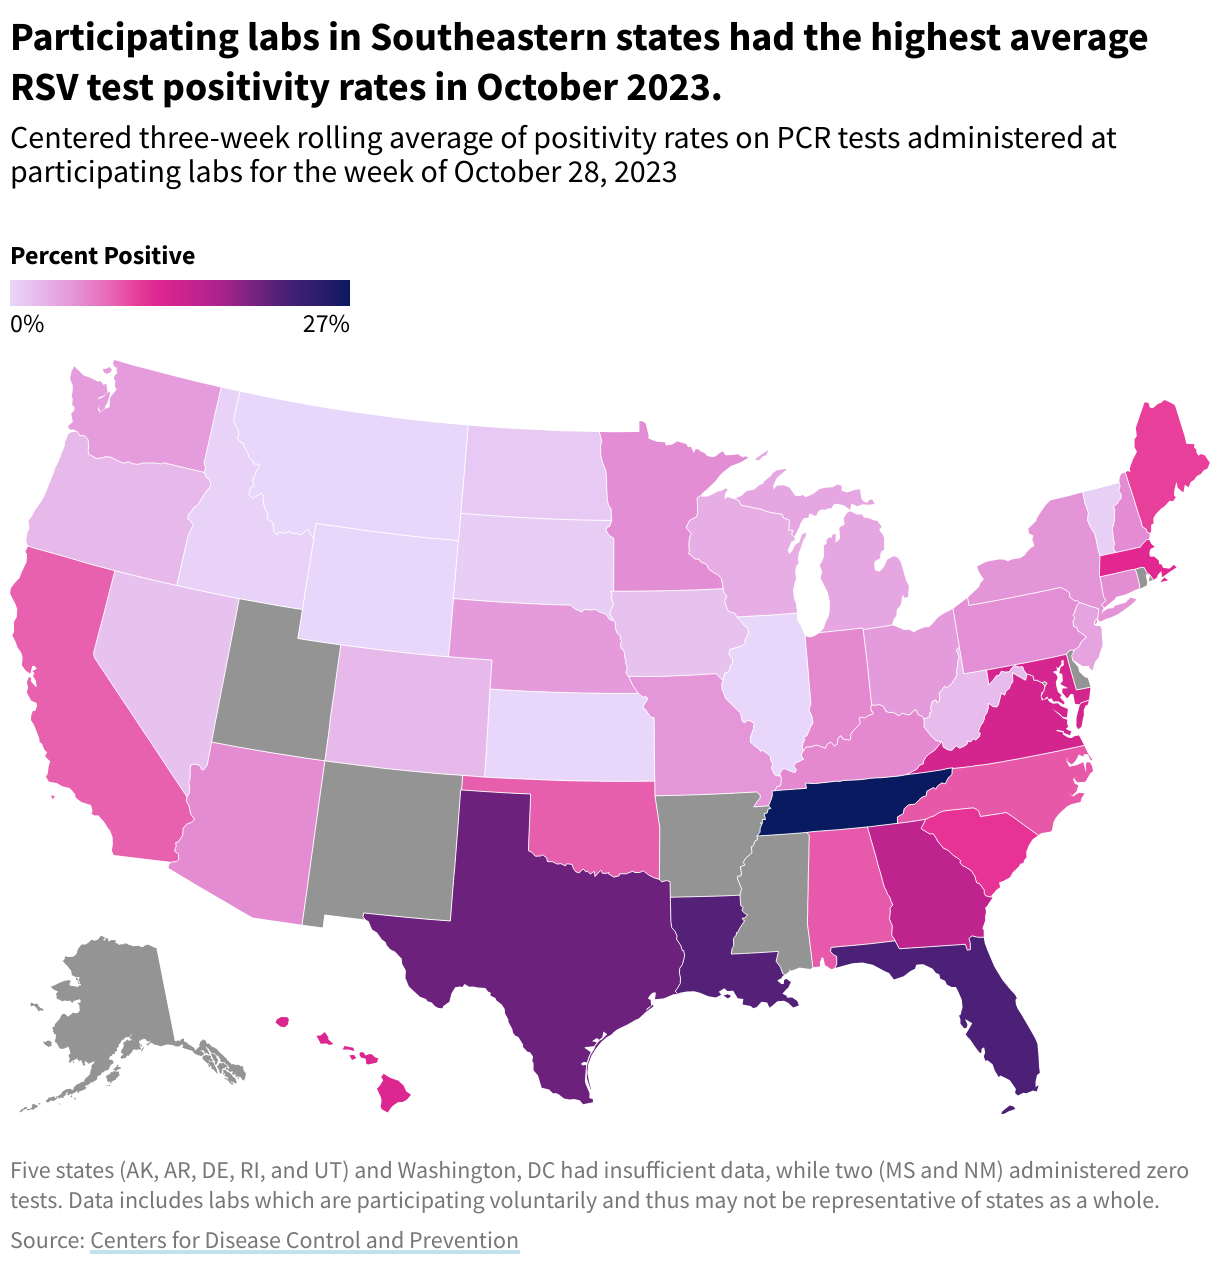 A US map showing RSV positivity rates on PCR tests administered at participating labs for the week of October 28, 2023. Labs in the Southeast had the highest averages.